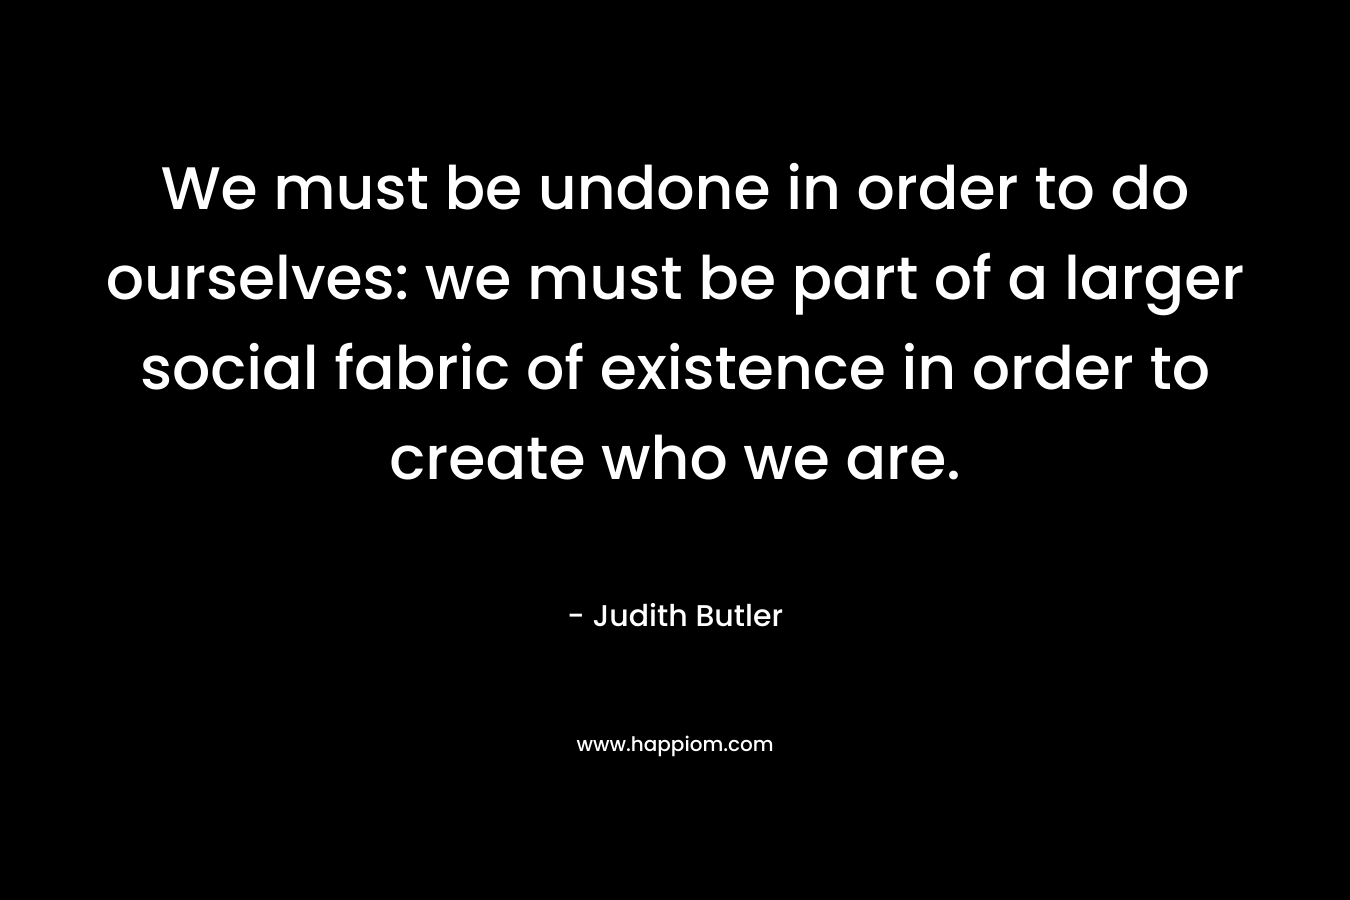 We must be undone in order to do ourselves: we must be part of a larger social fabric of existence in order to create who we are.